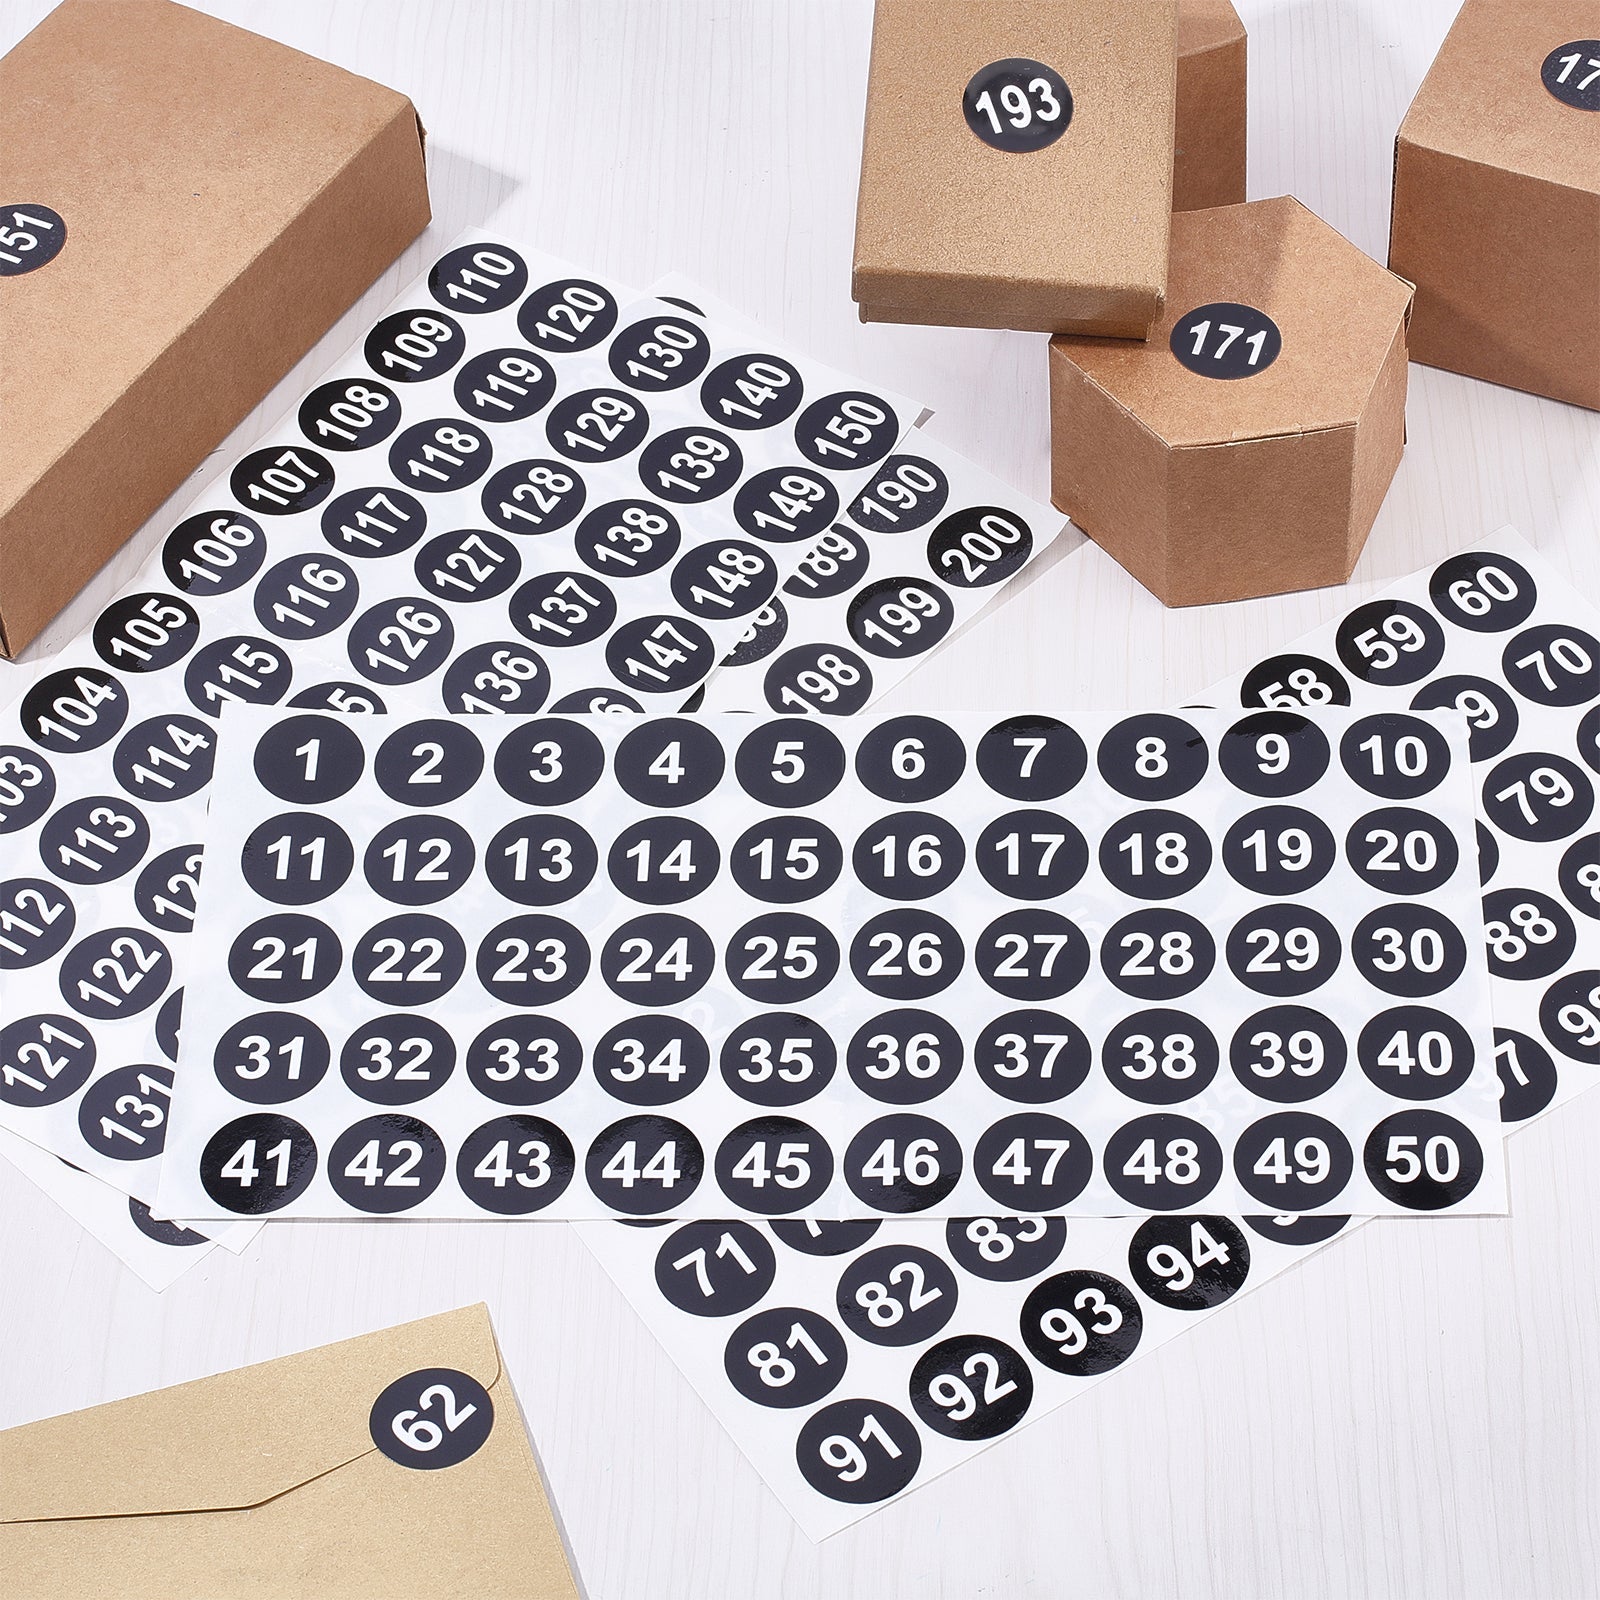 Thank You Stickers / Labels Black Round Stickers 45mm Circle 1.77 Inches  Pack of 48 Stickers 